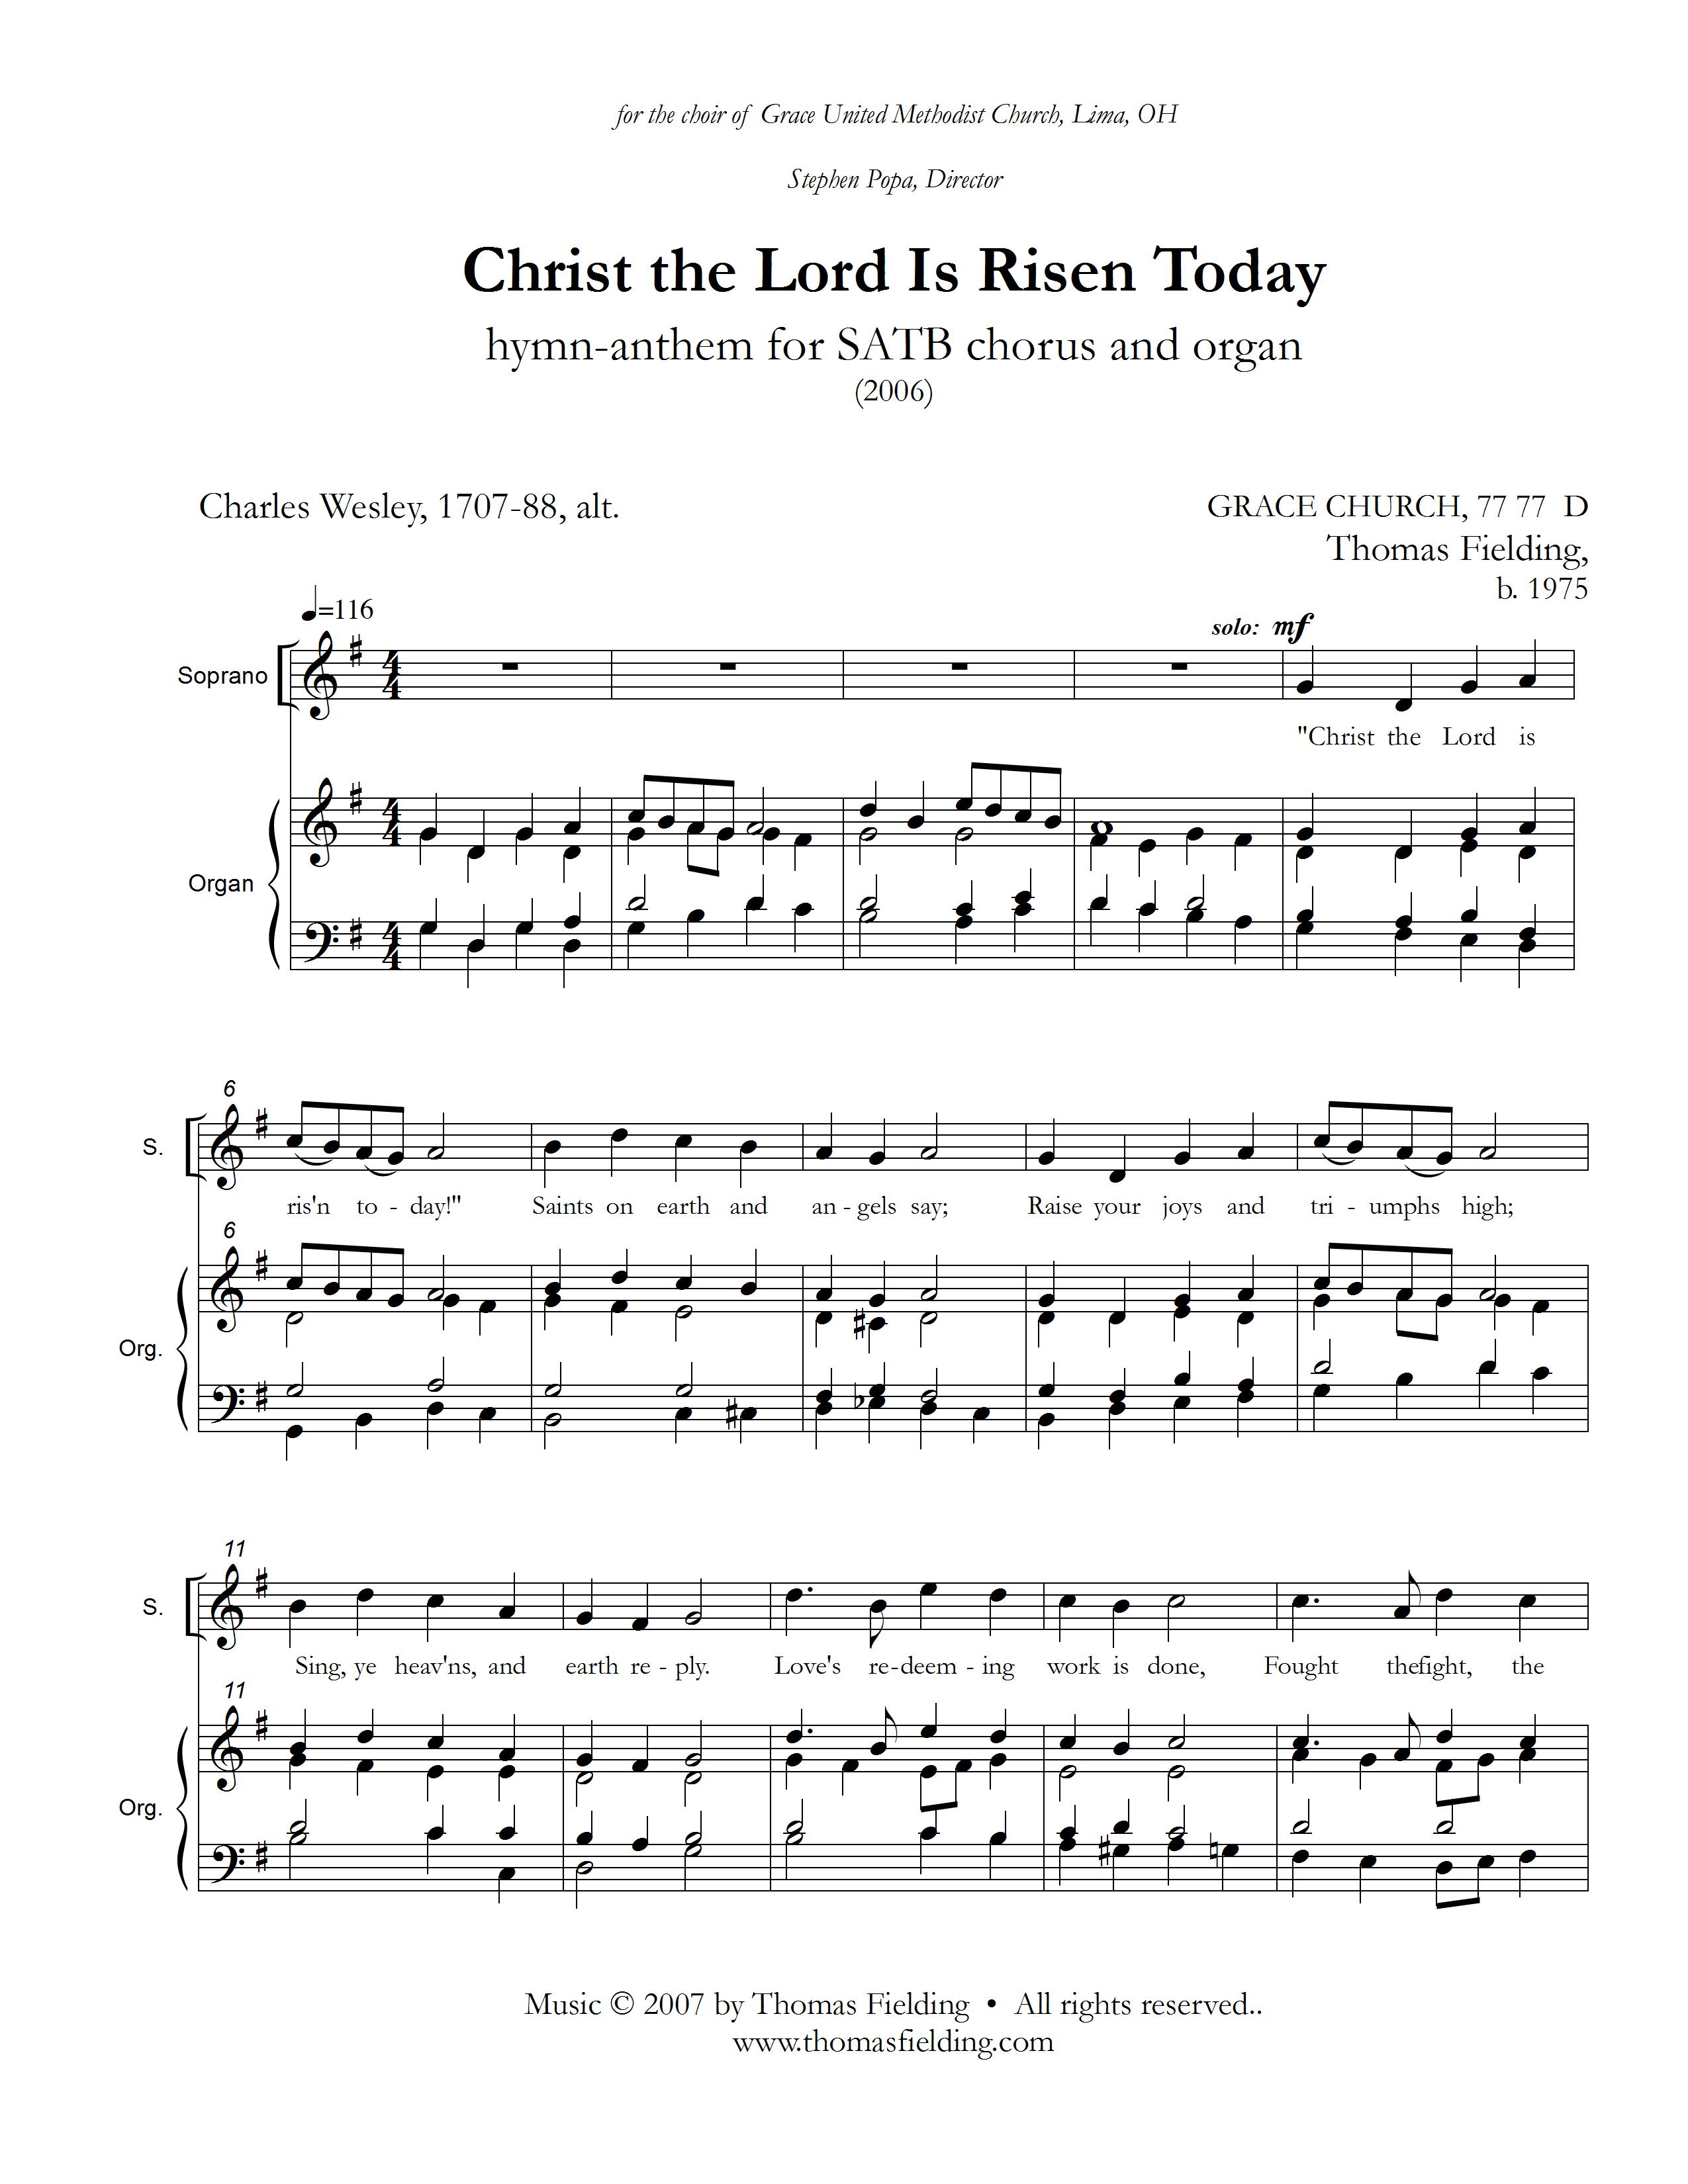 "Christ the Lord Is Risen Today" Title page